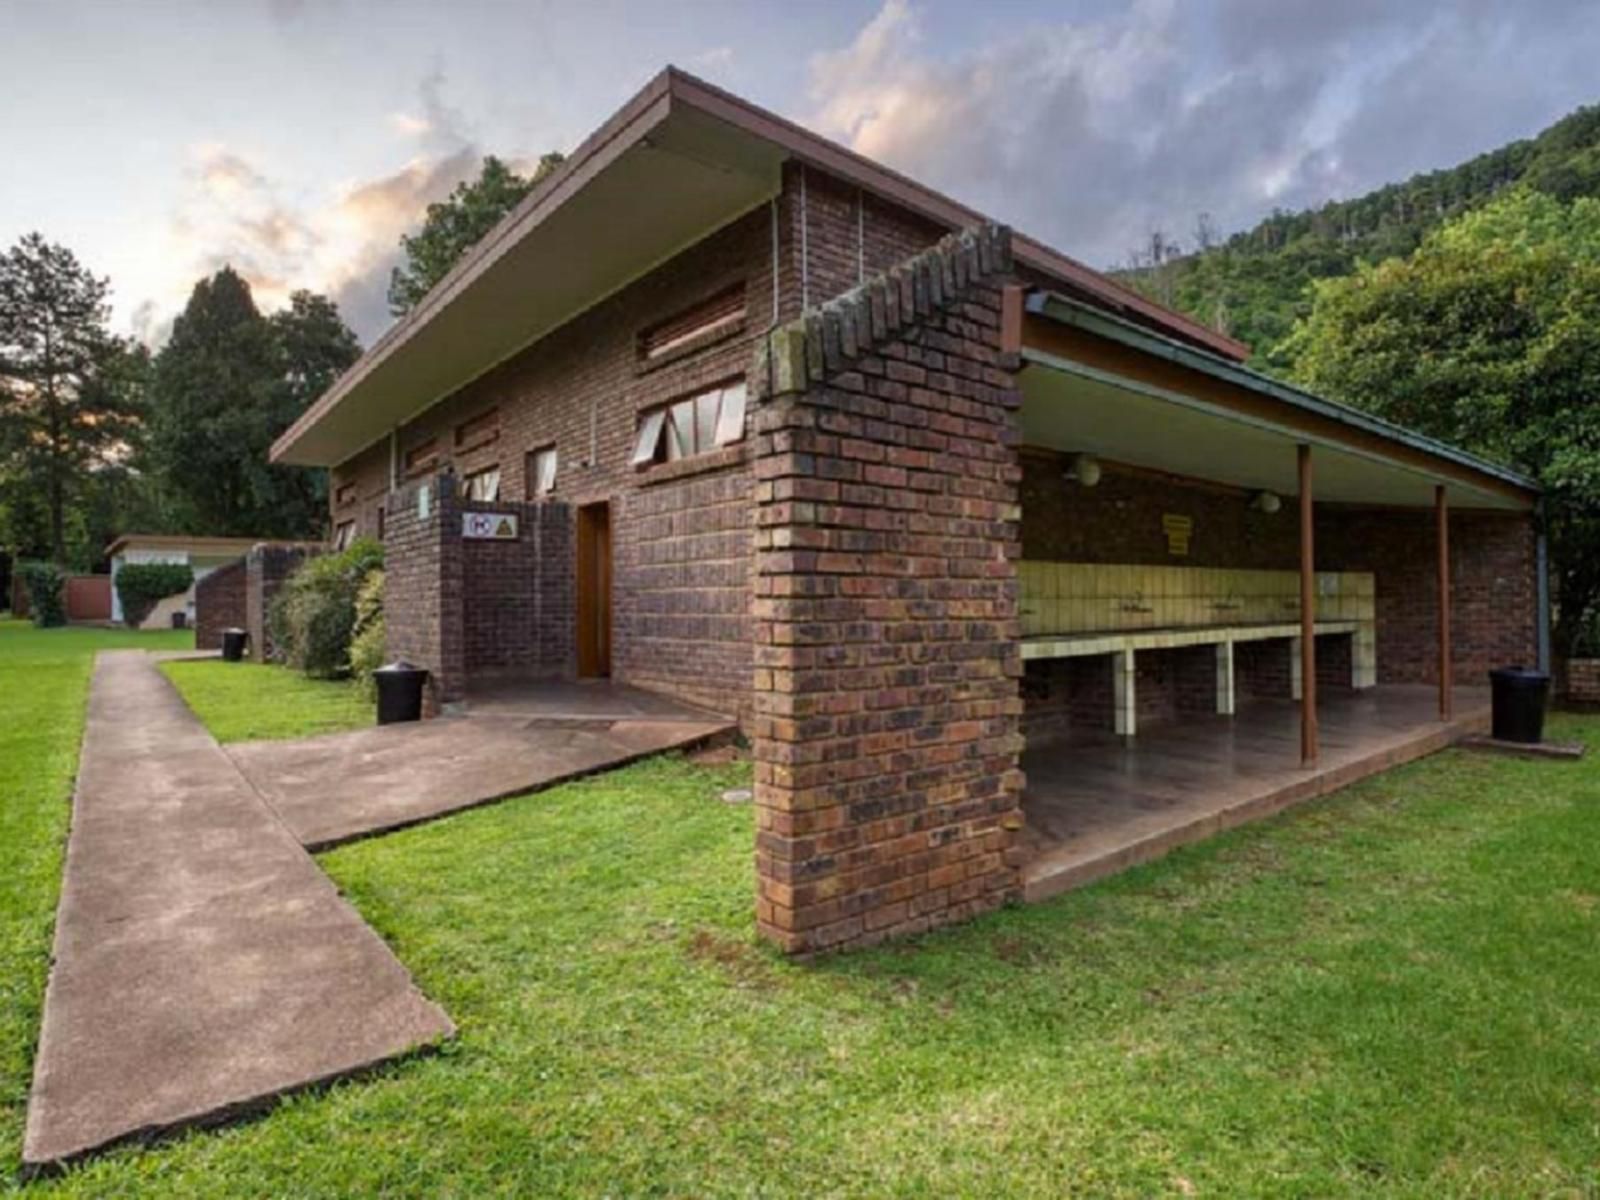 Merry Pebbles Resort Sabie Mpumalanga South Africa Cabin, Building, Architecture